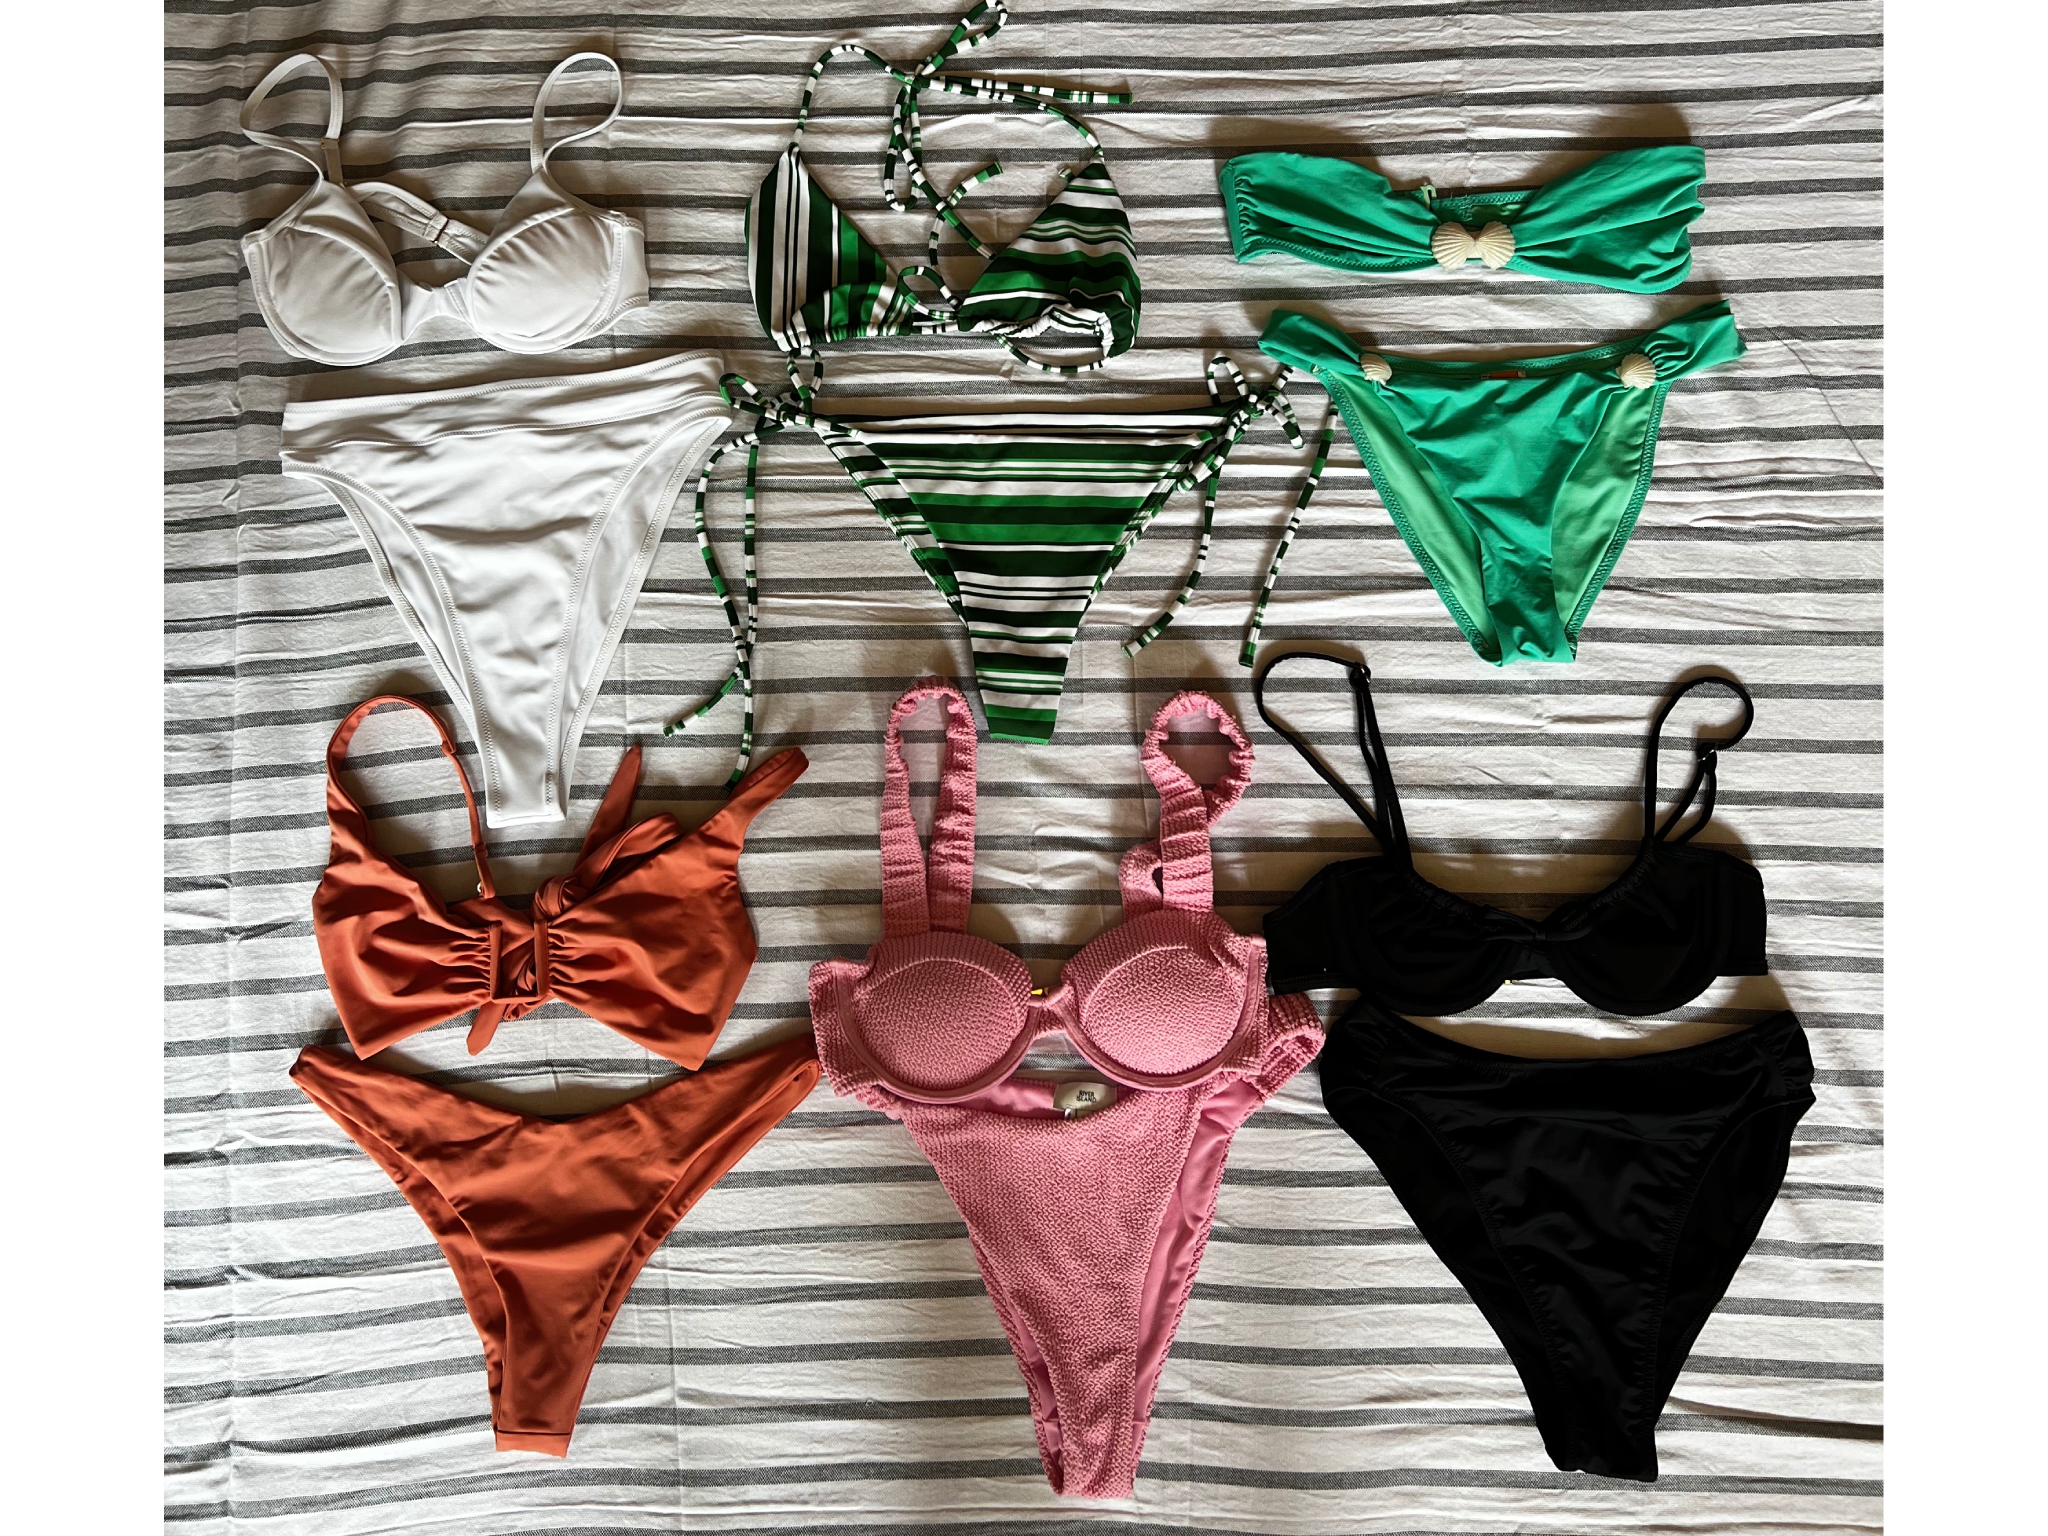 A selection of the best bikini sets that we tested for this review